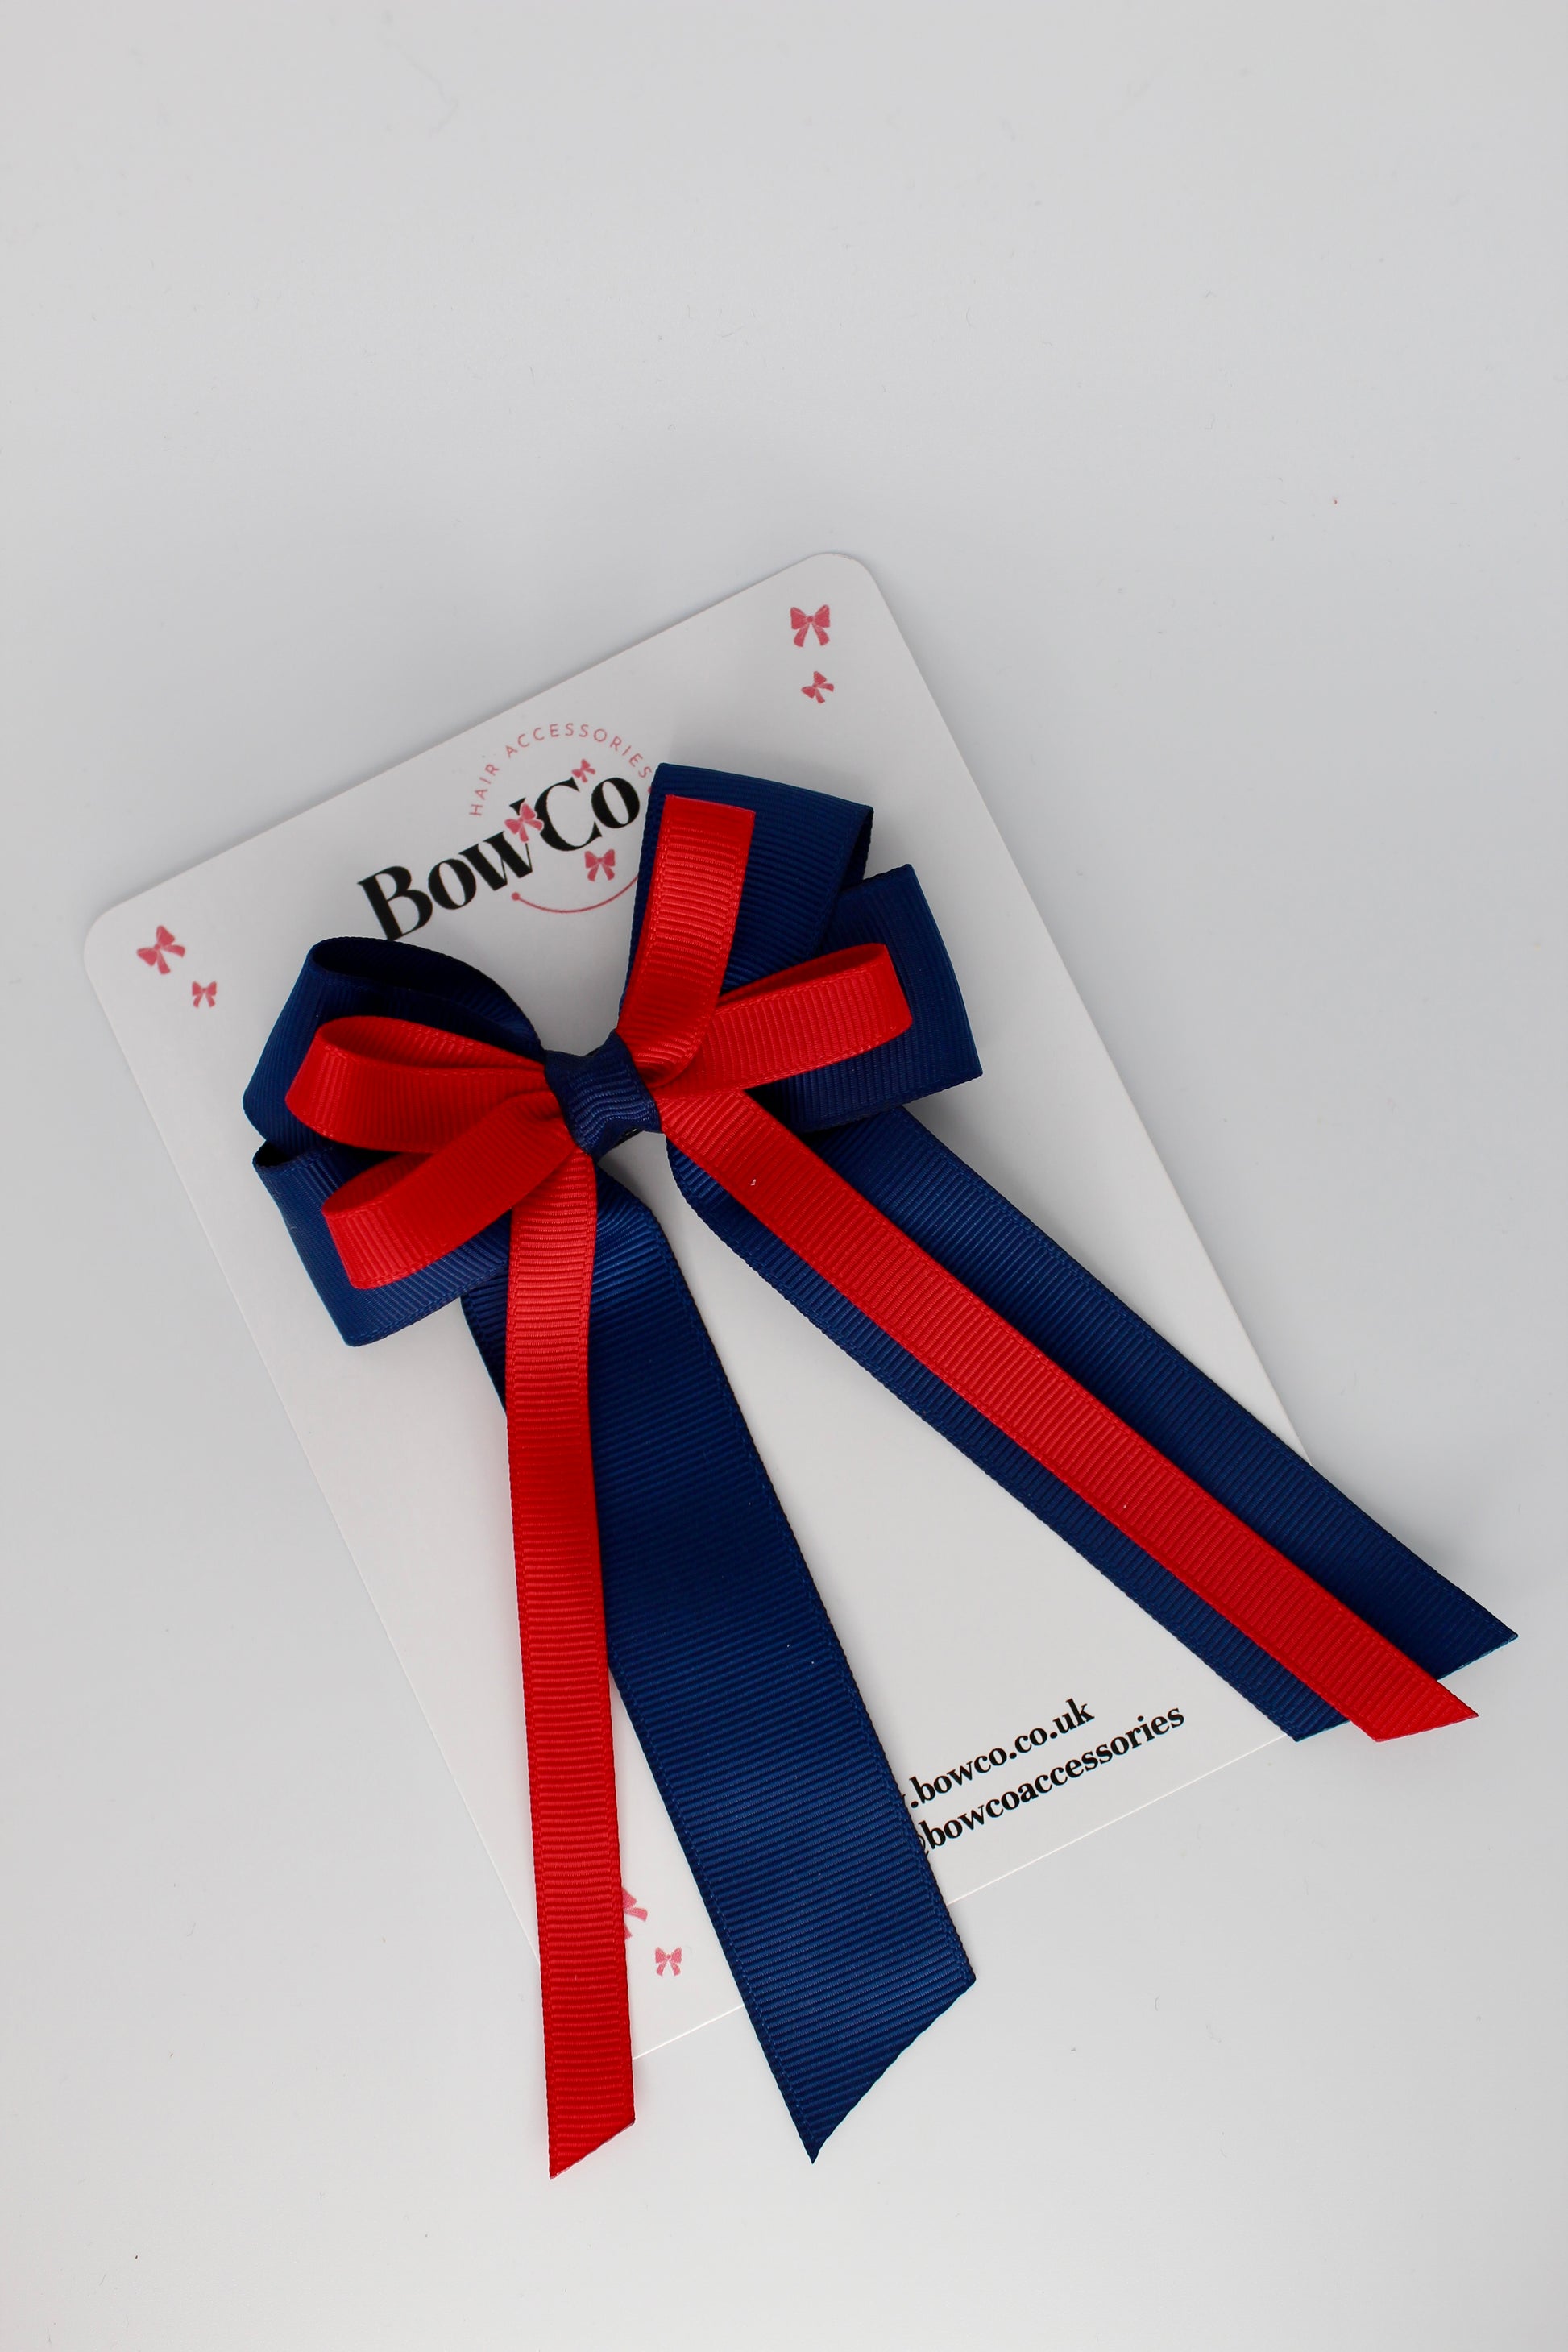 4 Inch Loop Bow Clip PonyTail - Red and Navy Blue